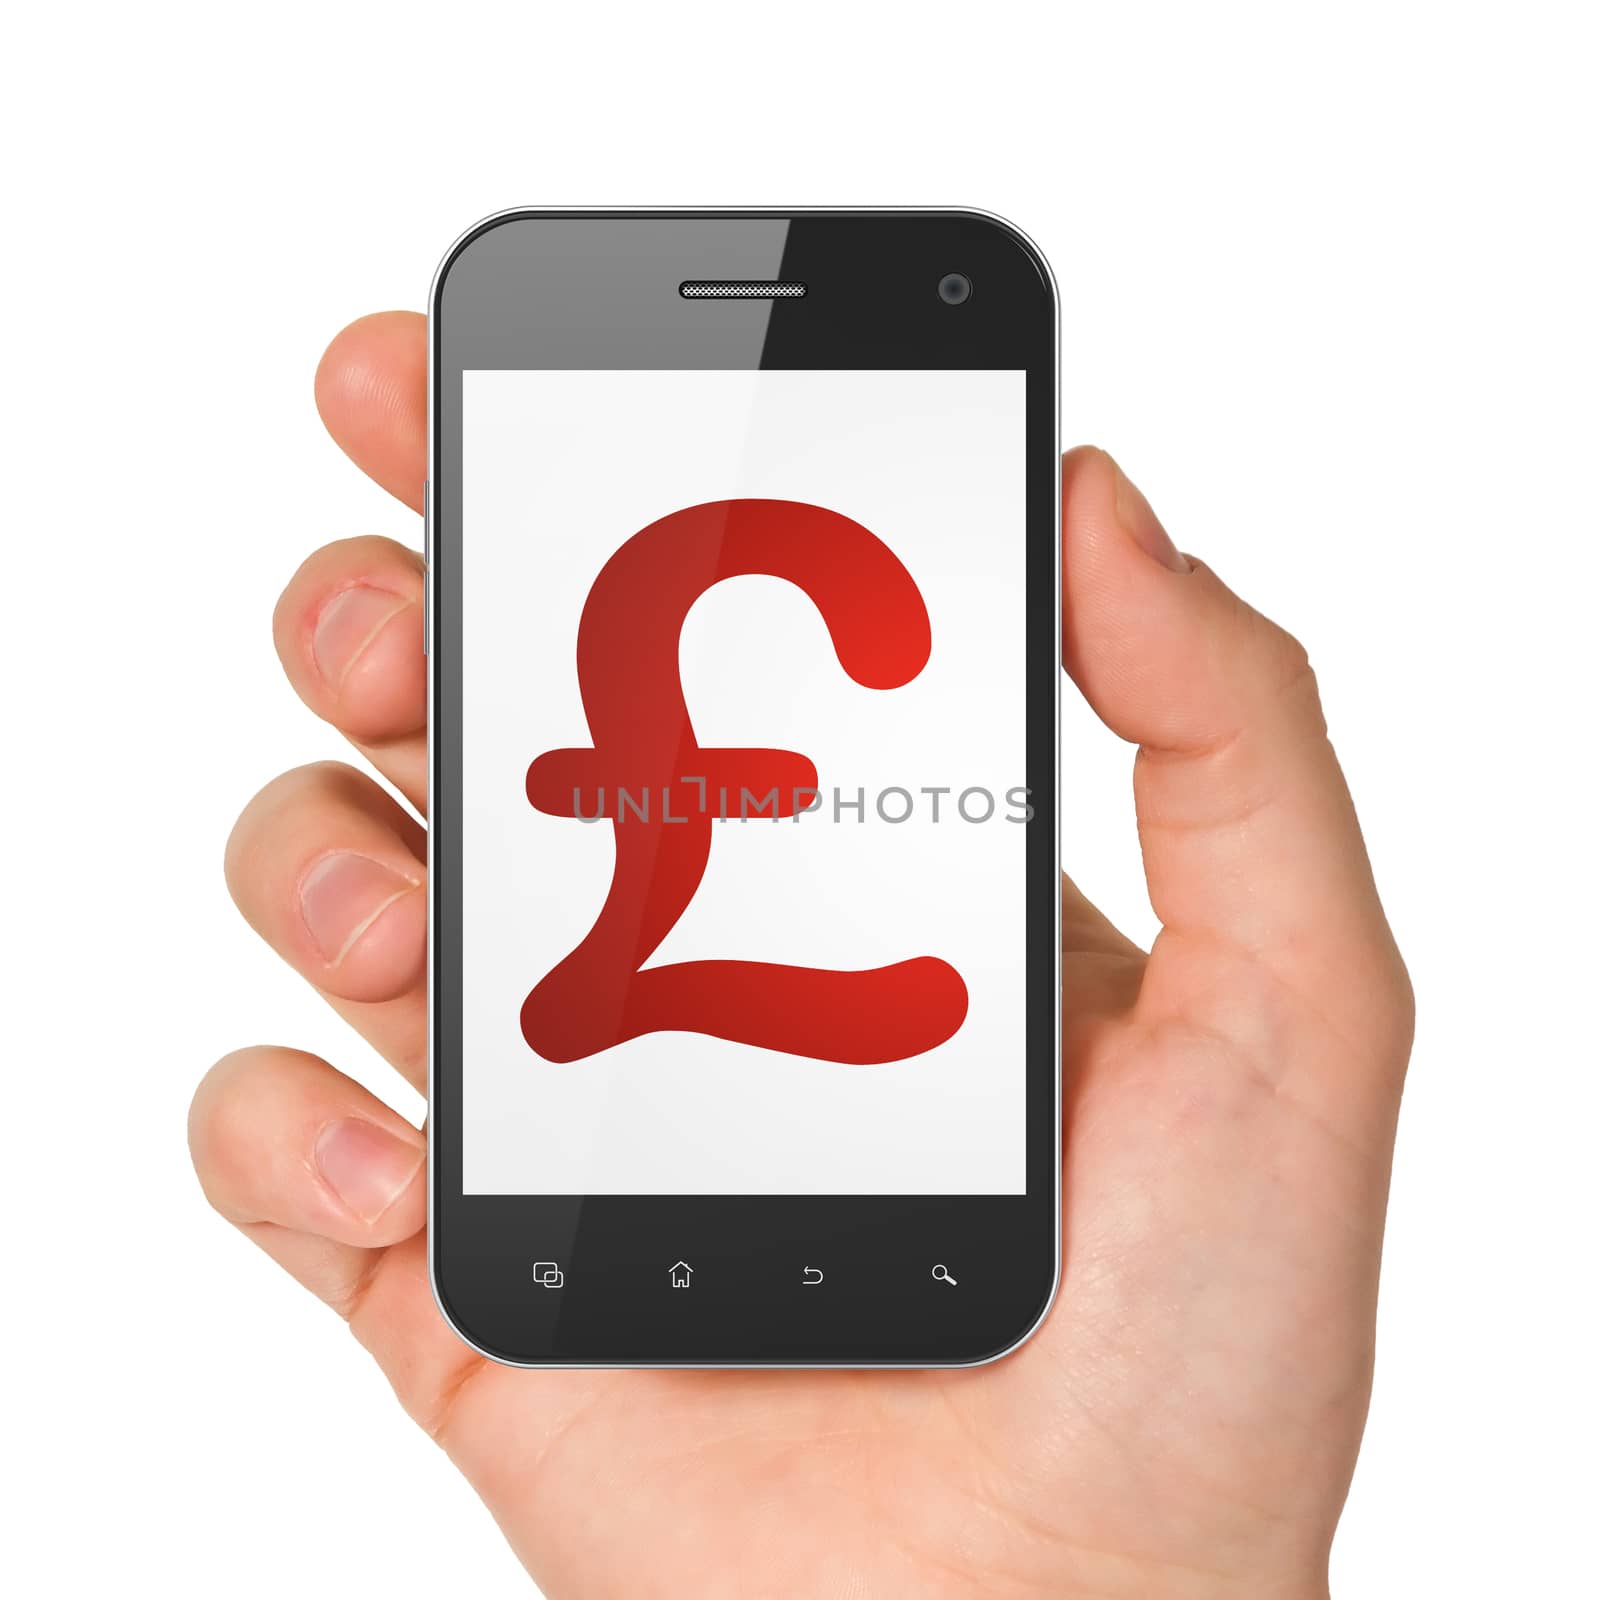 Currency concept: hand holding smartphone with Pound on display. Mobile smart phone on White background, 3d render